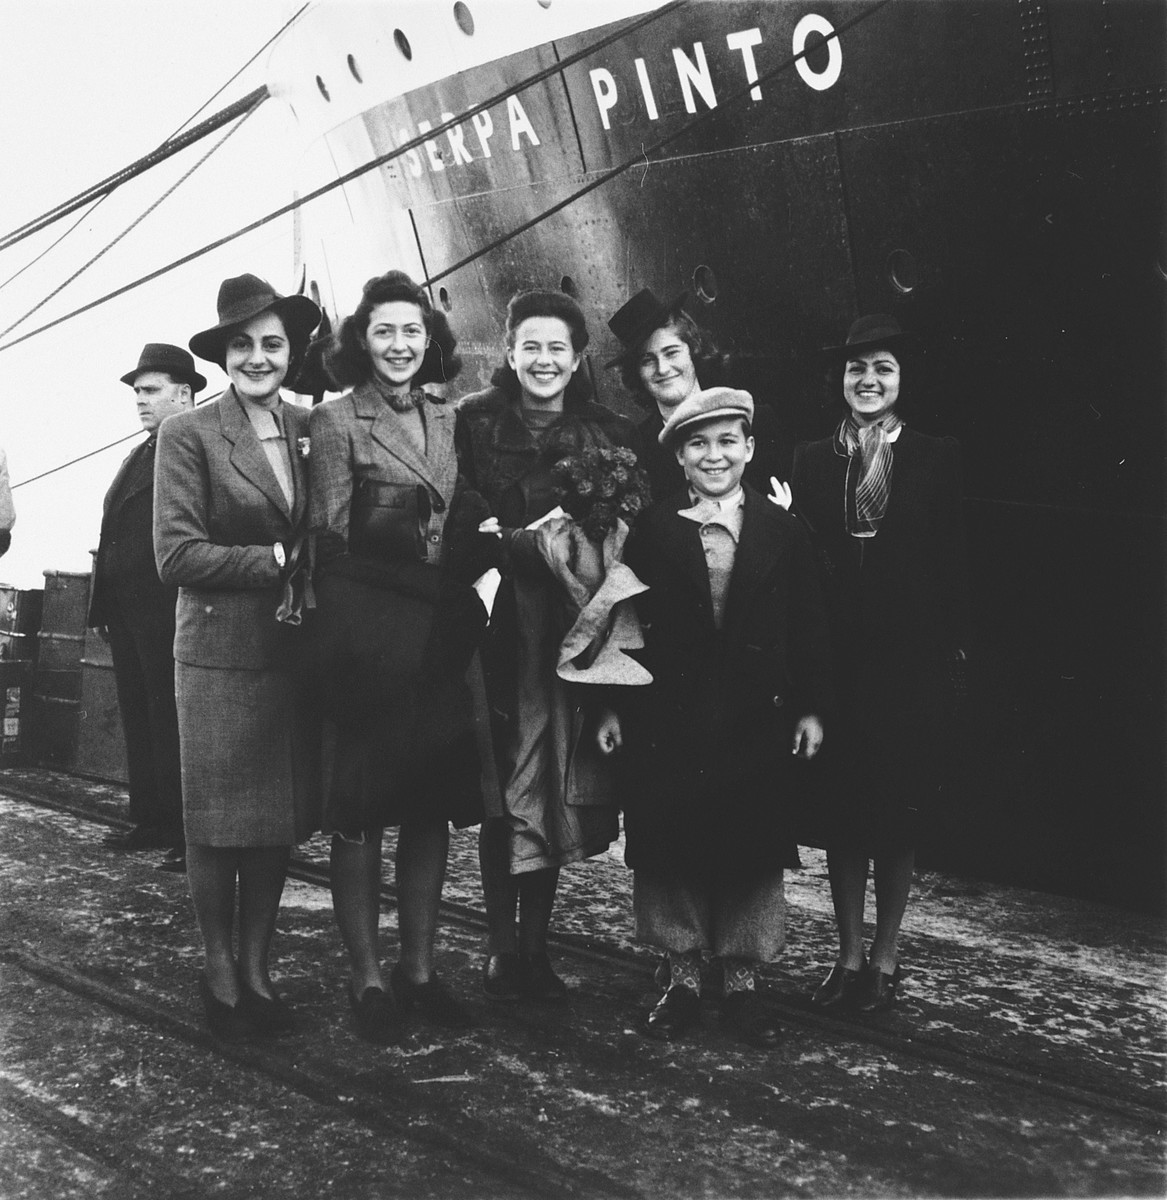 A group of Jewish refugees pose on the pier in the port of Lisbon before boarding the SS Serpa Pinto. 

Among those pictured is Madeleine Hecht Feher, center holding a bouquet of flowers, surrounded by her co-workers from the American Joint Distribtuion Committee.  They came to wish her farewell before embarking.  Also pictured is her brother, Thomas Hecht, the young boy in front.   Pictured on the far left is Lolita Goldstein, a JDC worker.